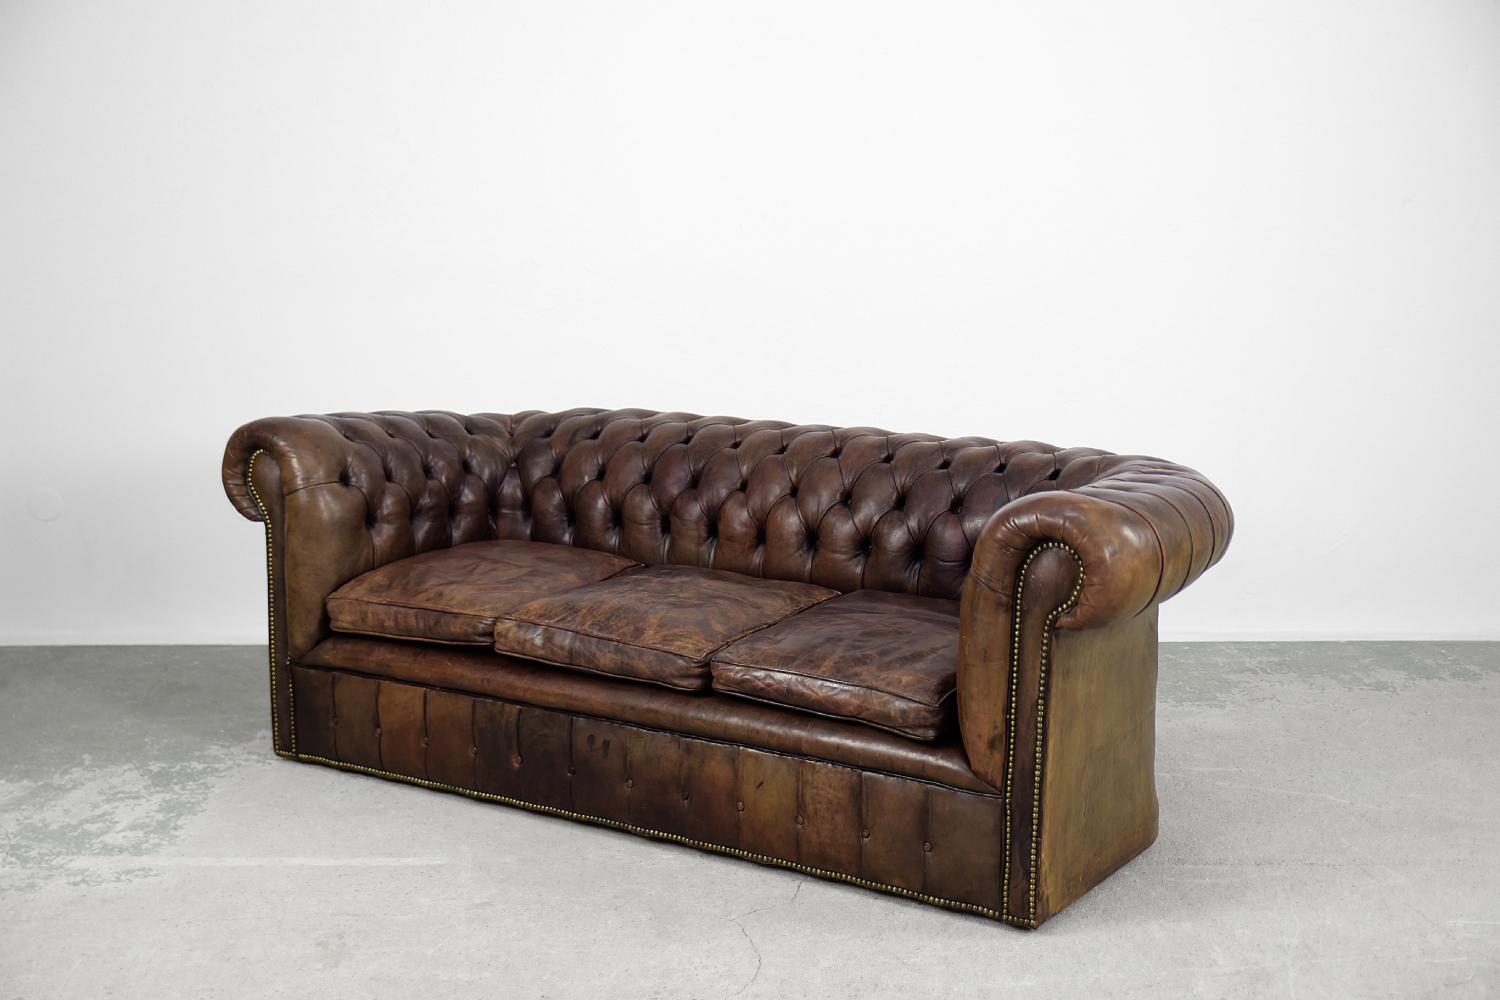 Vintage Iconic Large Three-Seater Antique Brown Leather Chesterfield Sofa, 1920er Jahre (Leder) im Angebot